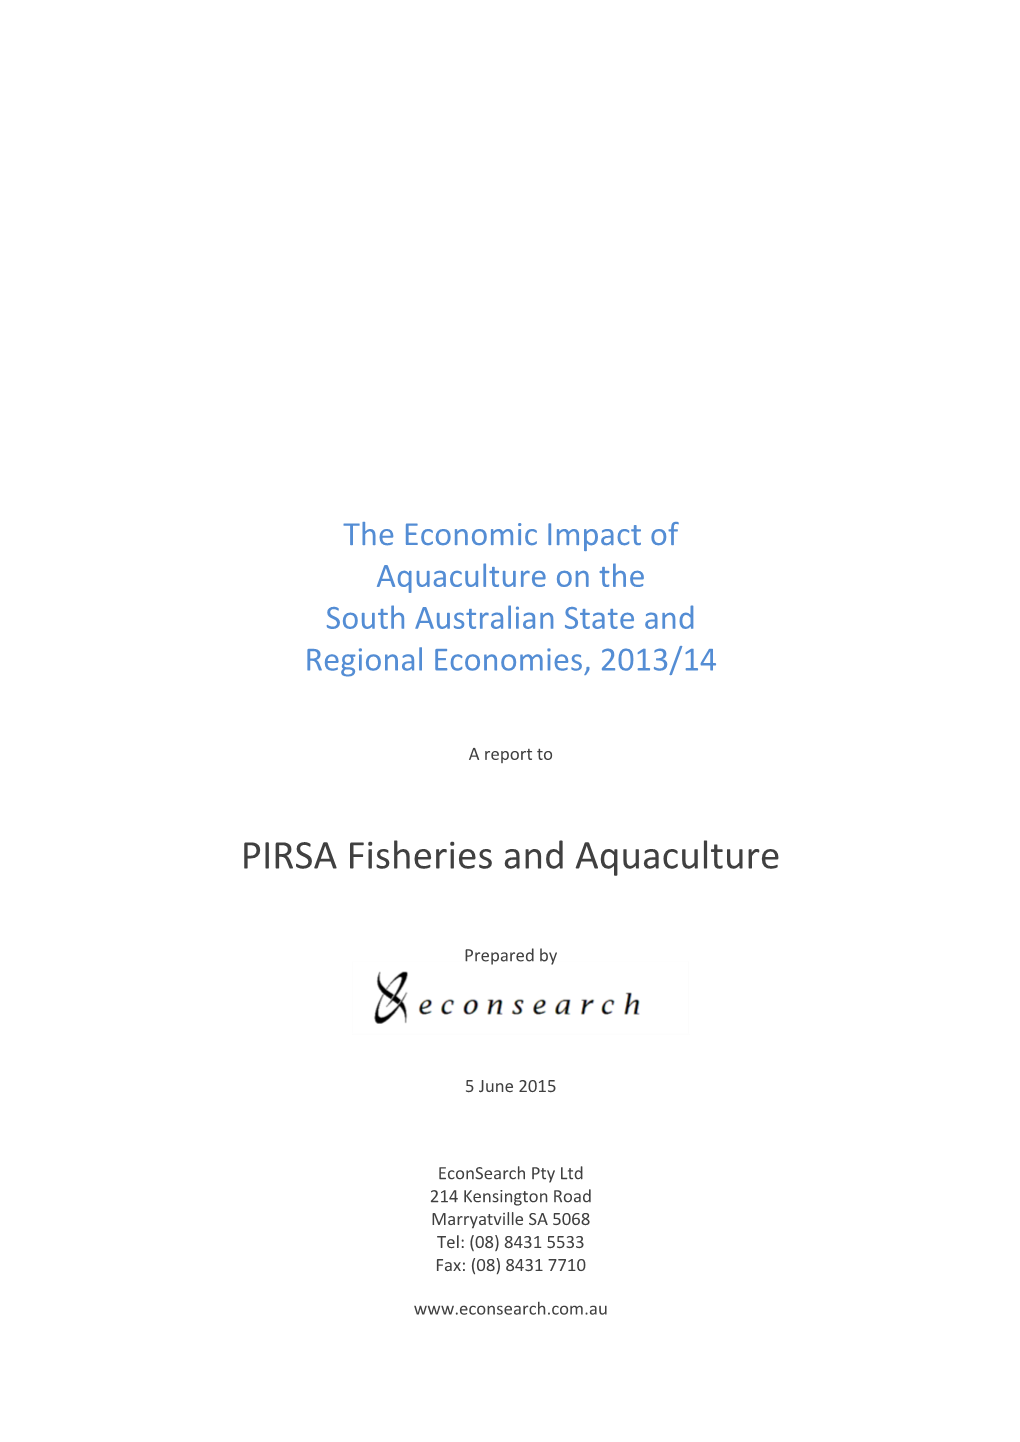 The Economic Impact of Aquaculture on the South Australian State and Regional Economies, 2013/14